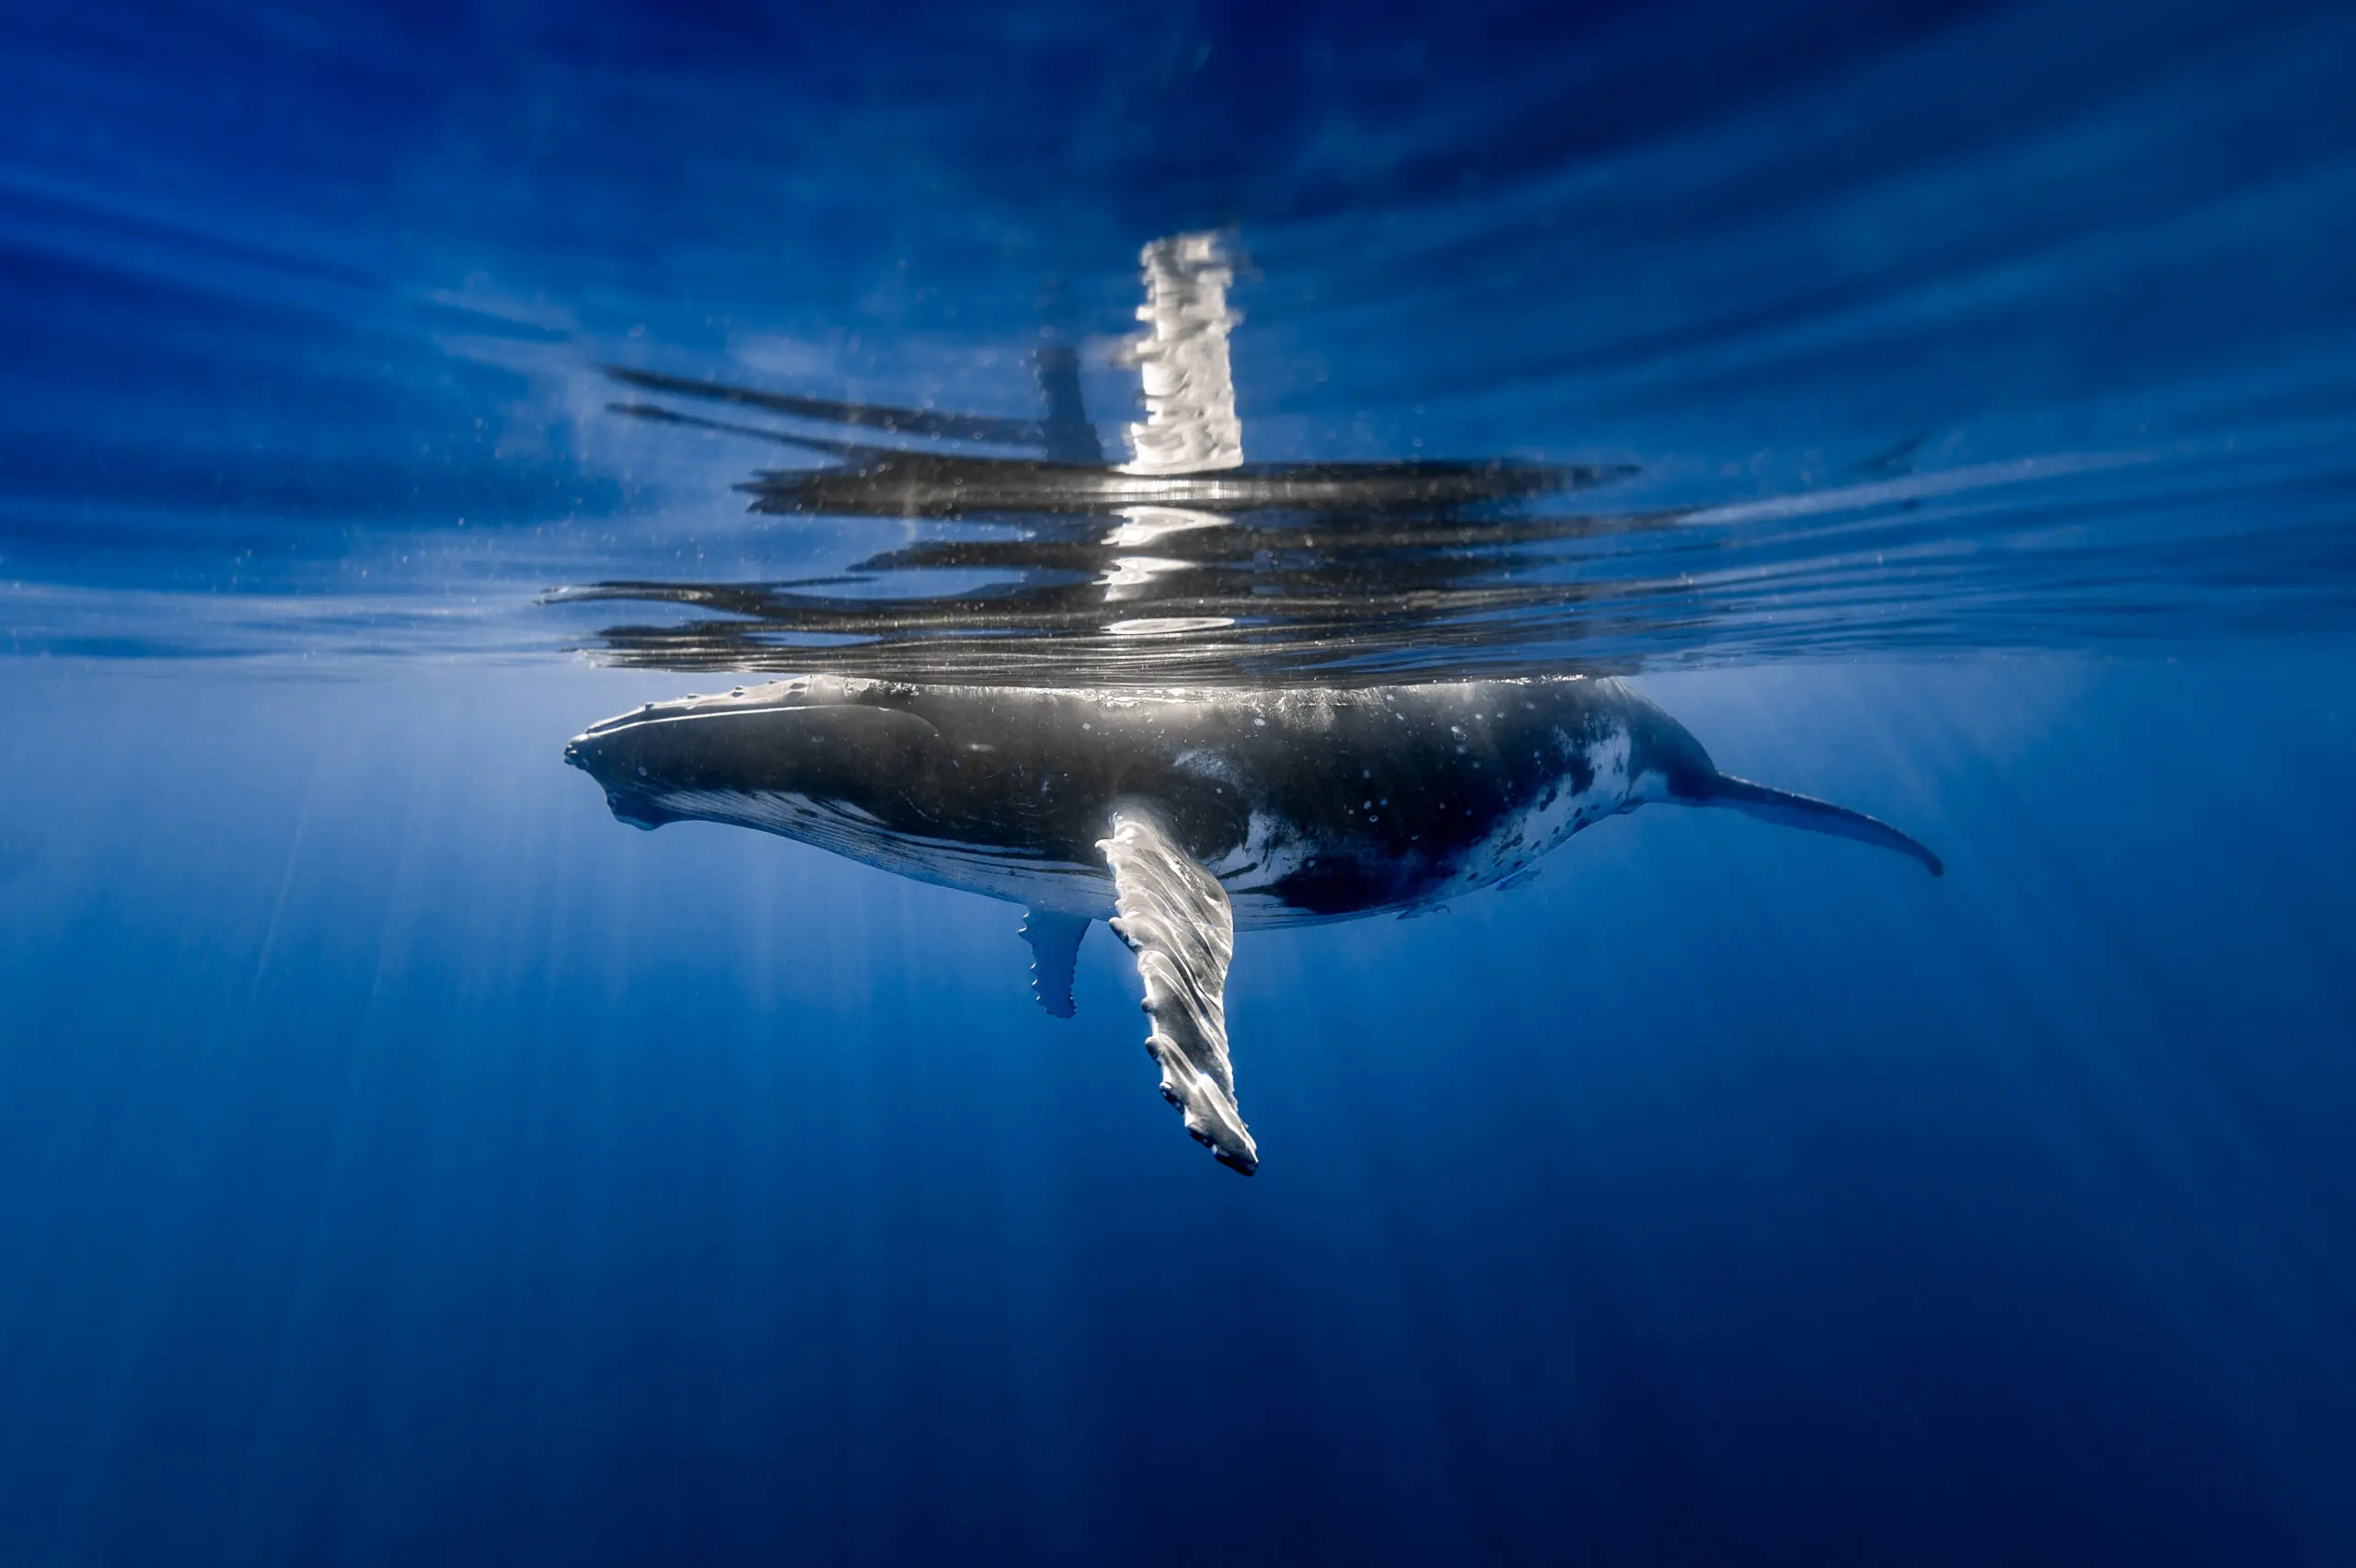 Whale at the surface of the ocean